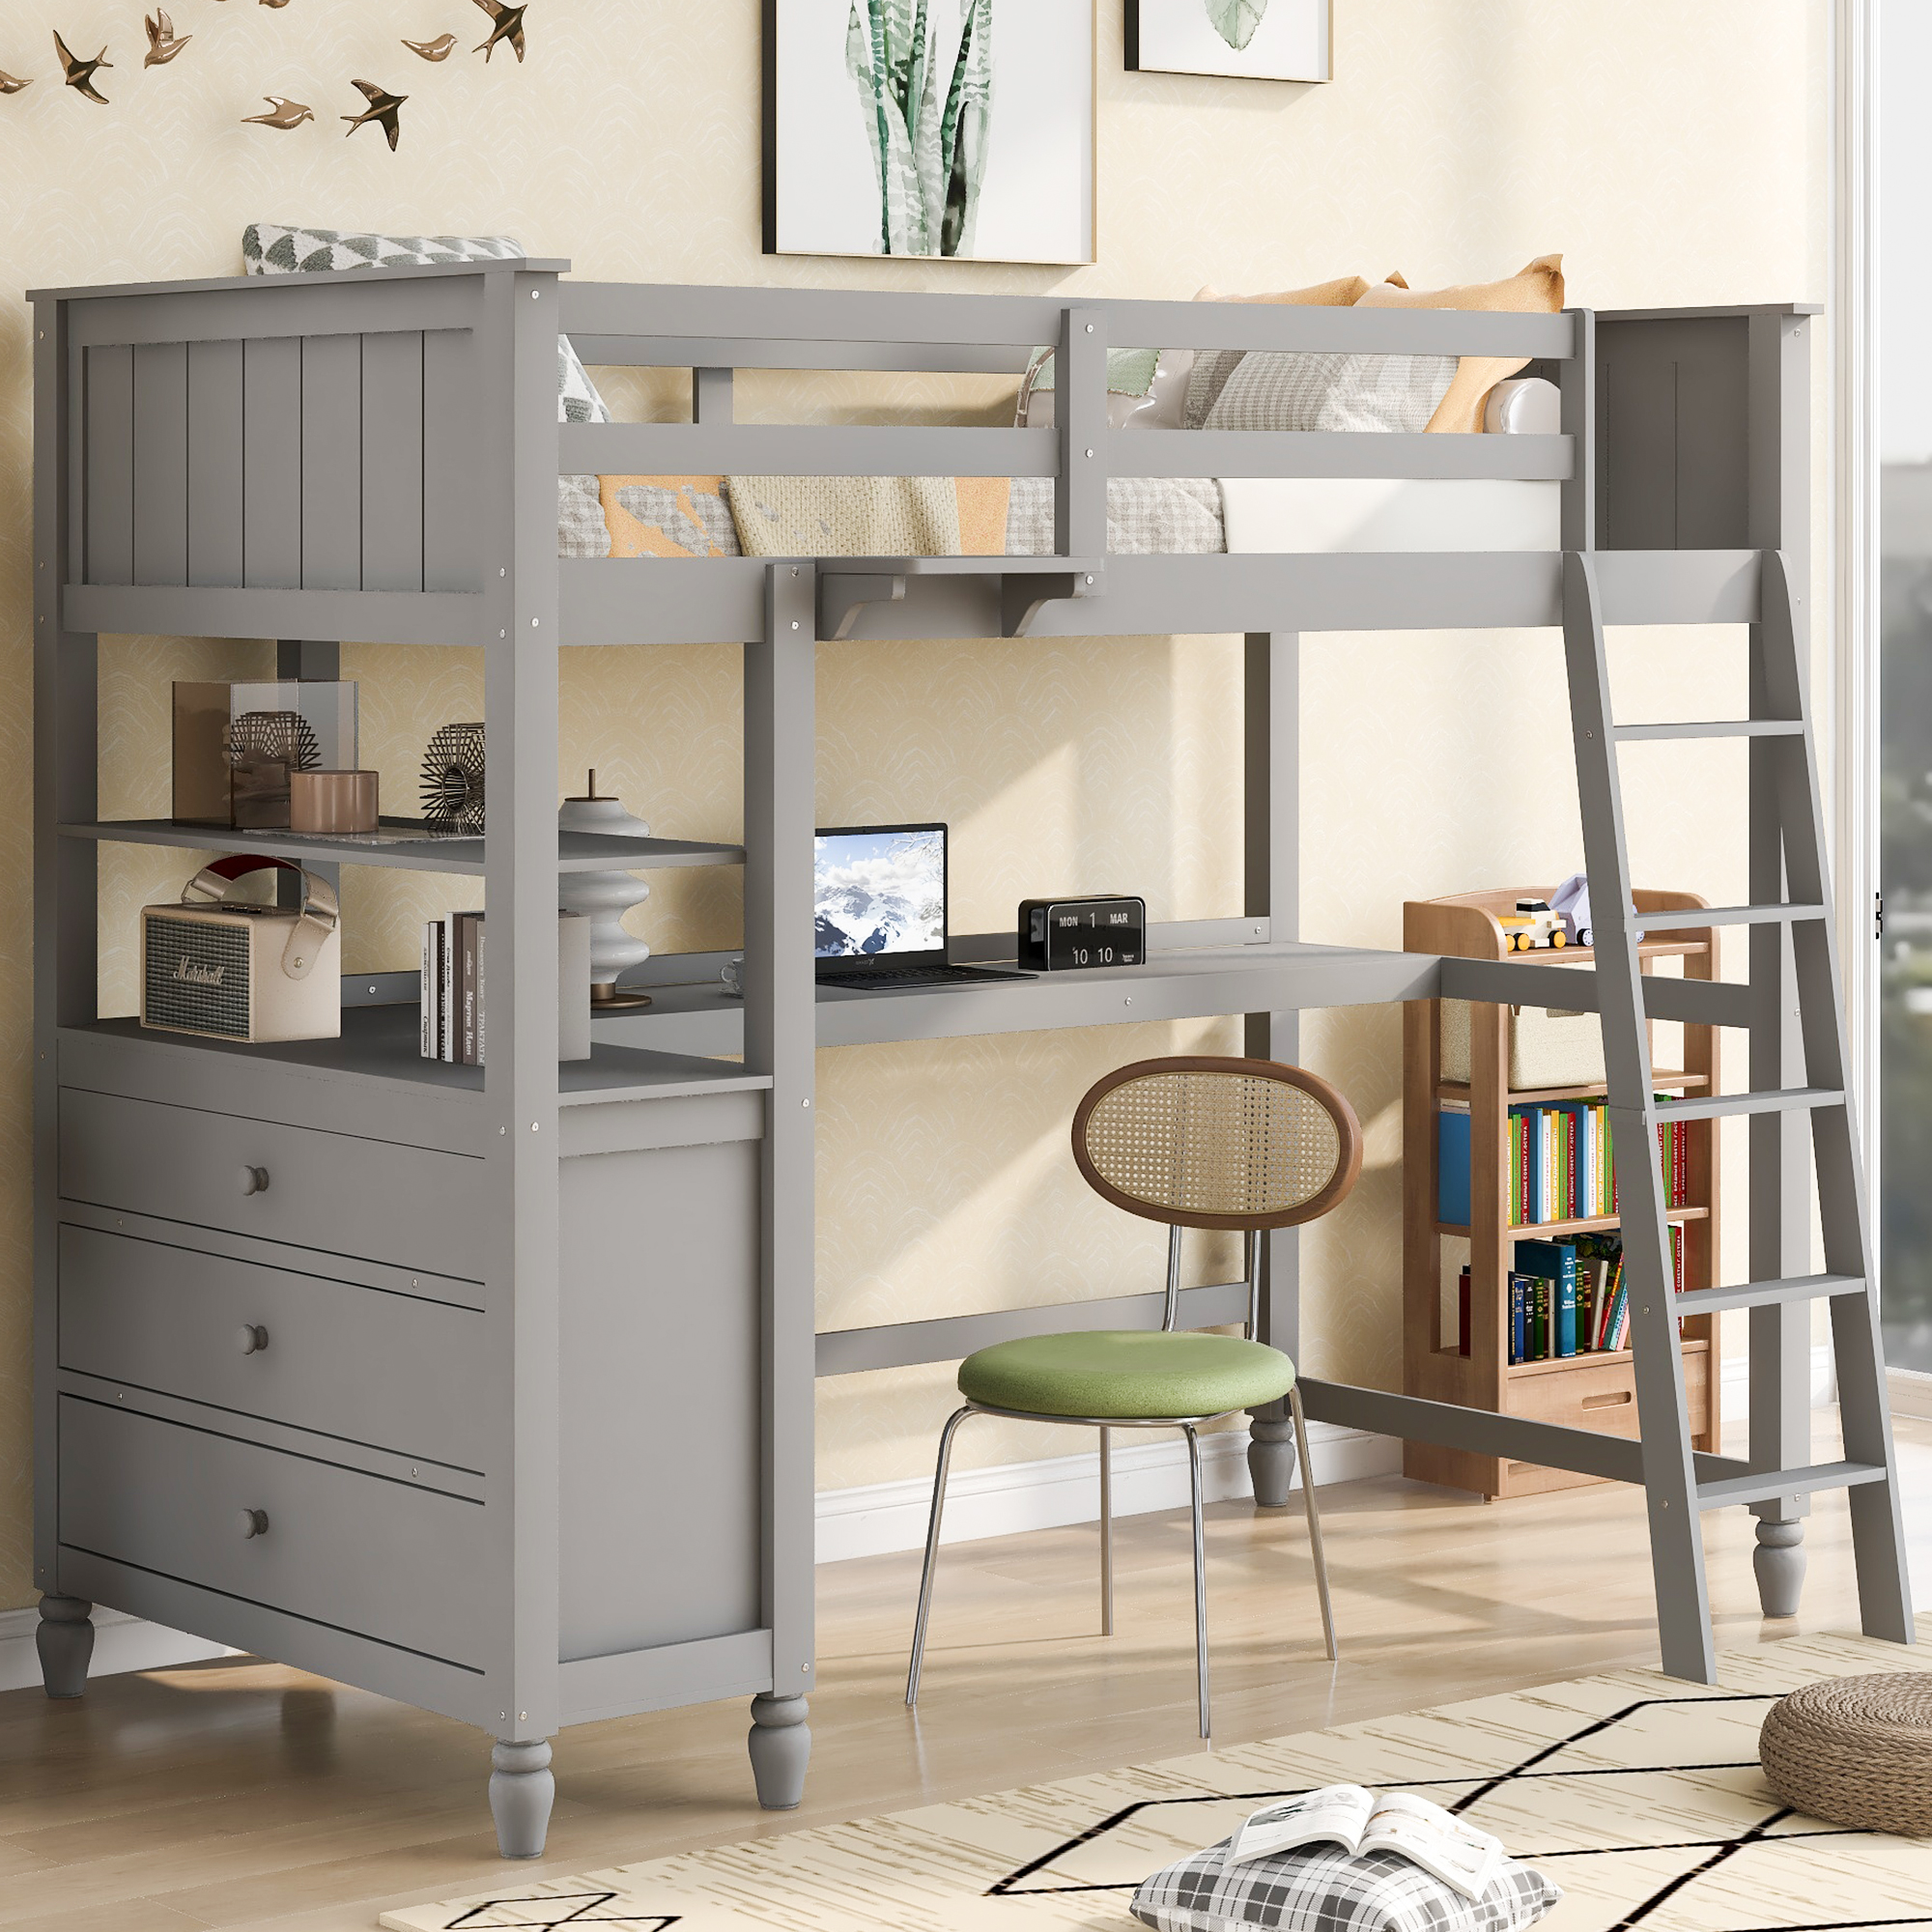 Wooden Twin Size Loft Bed with Drawers, Desk, and Shelves